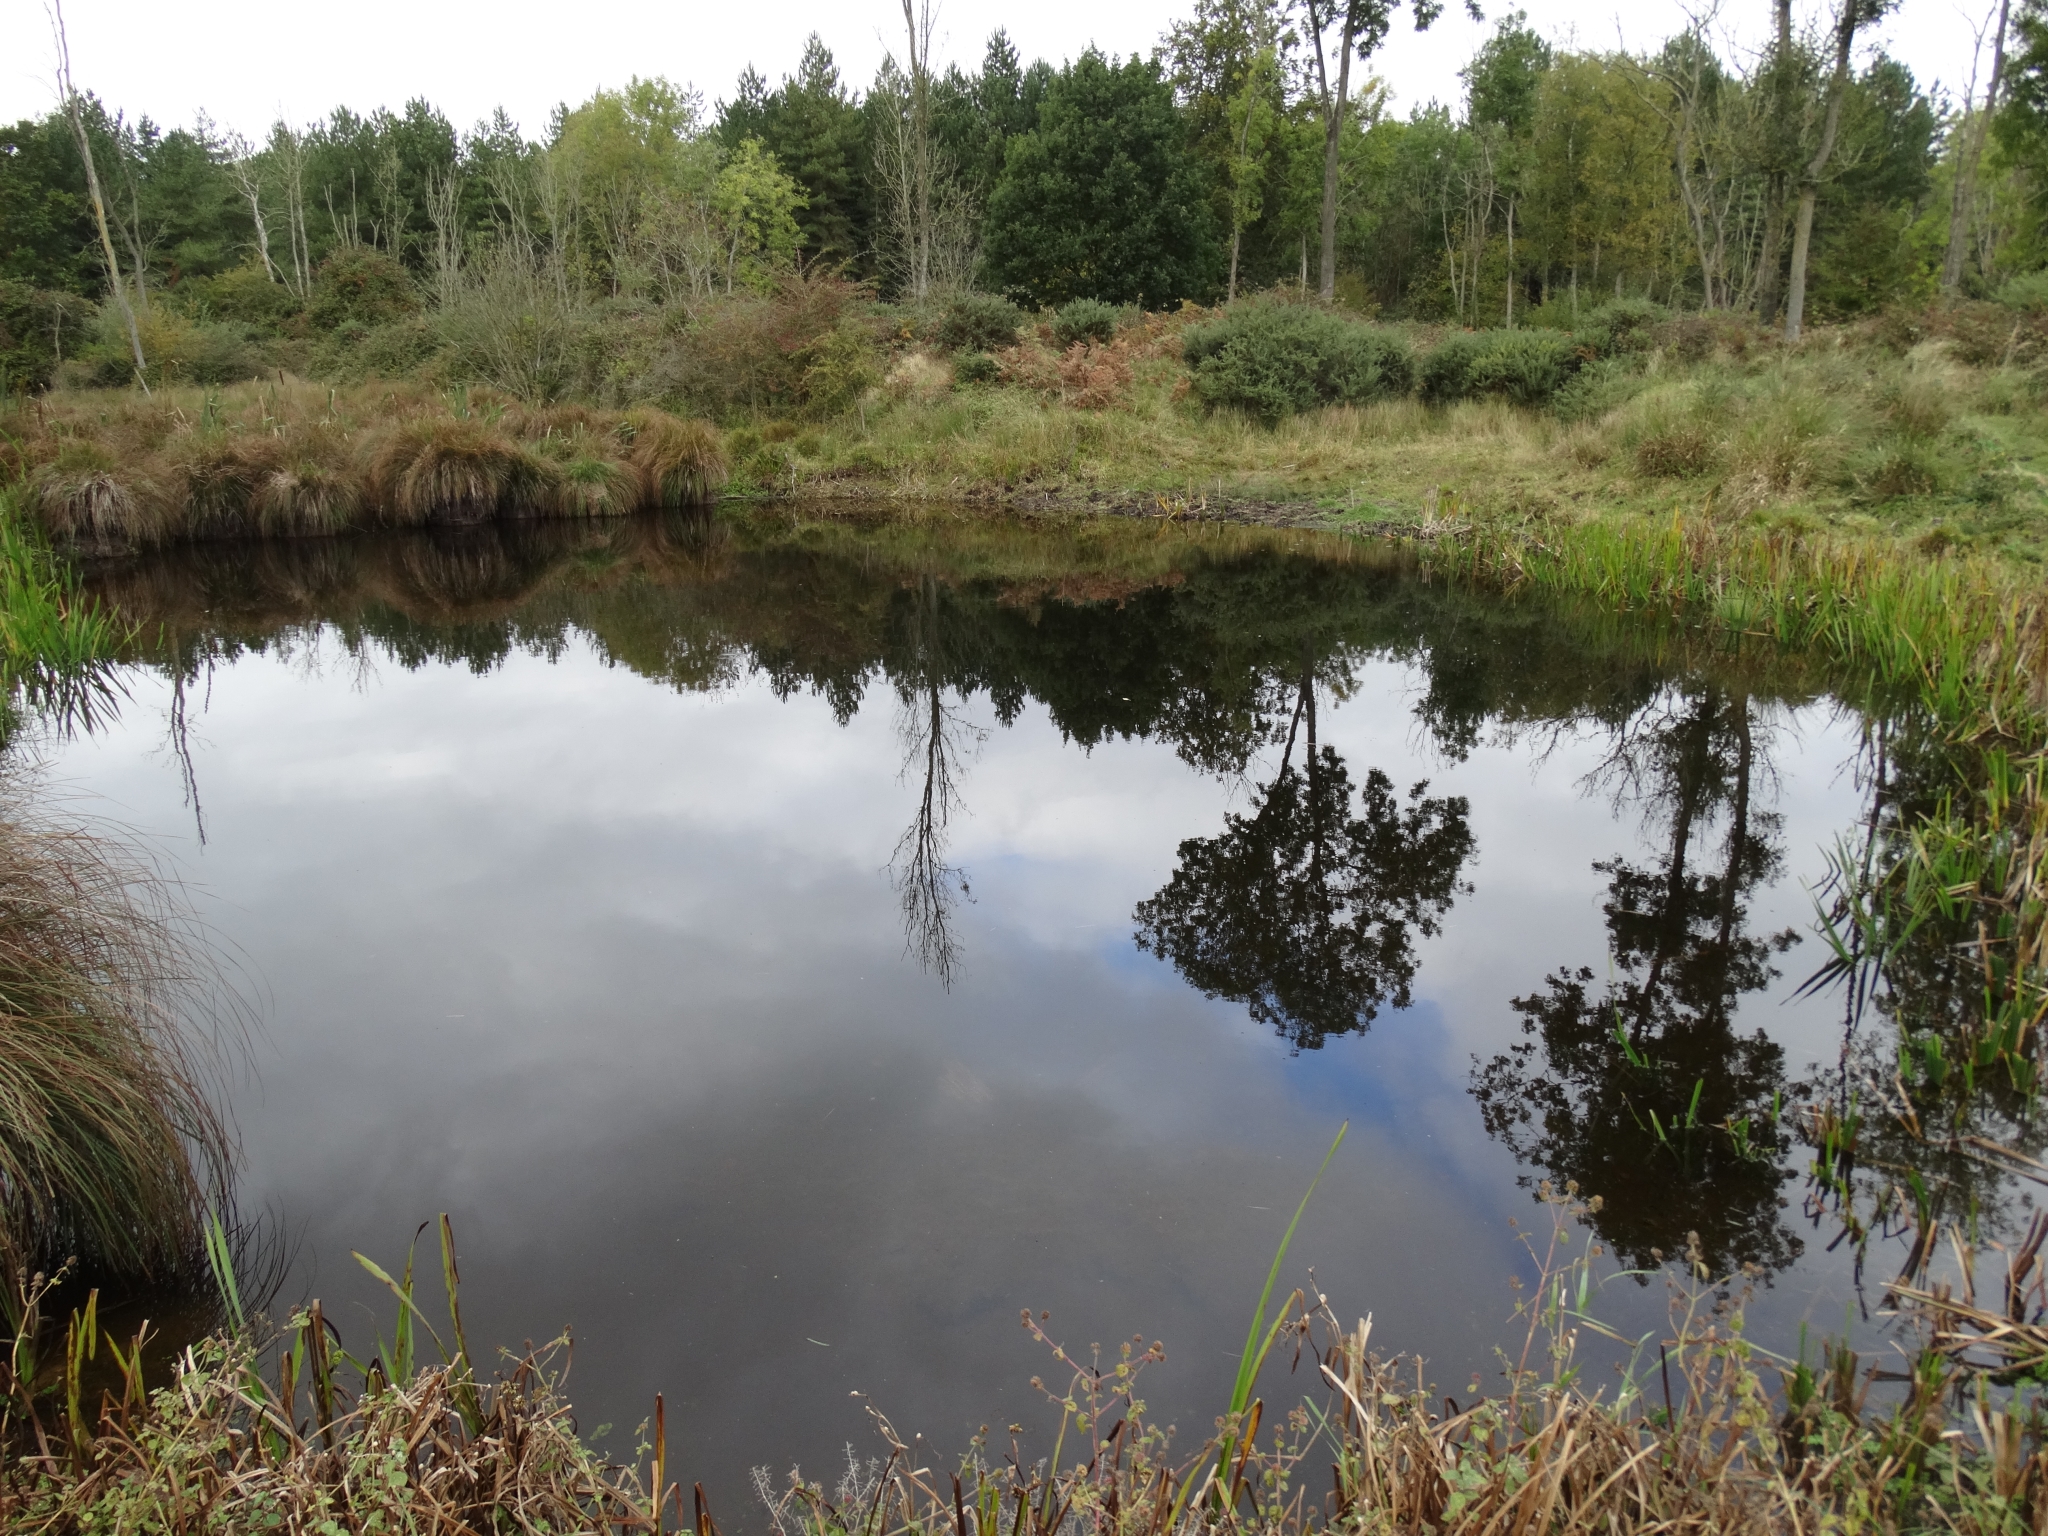 A photo from the FoTF Conservation Event - October 2019 - Gorse Clearance at Hockham Hills & Holes : A view of one of the ponds